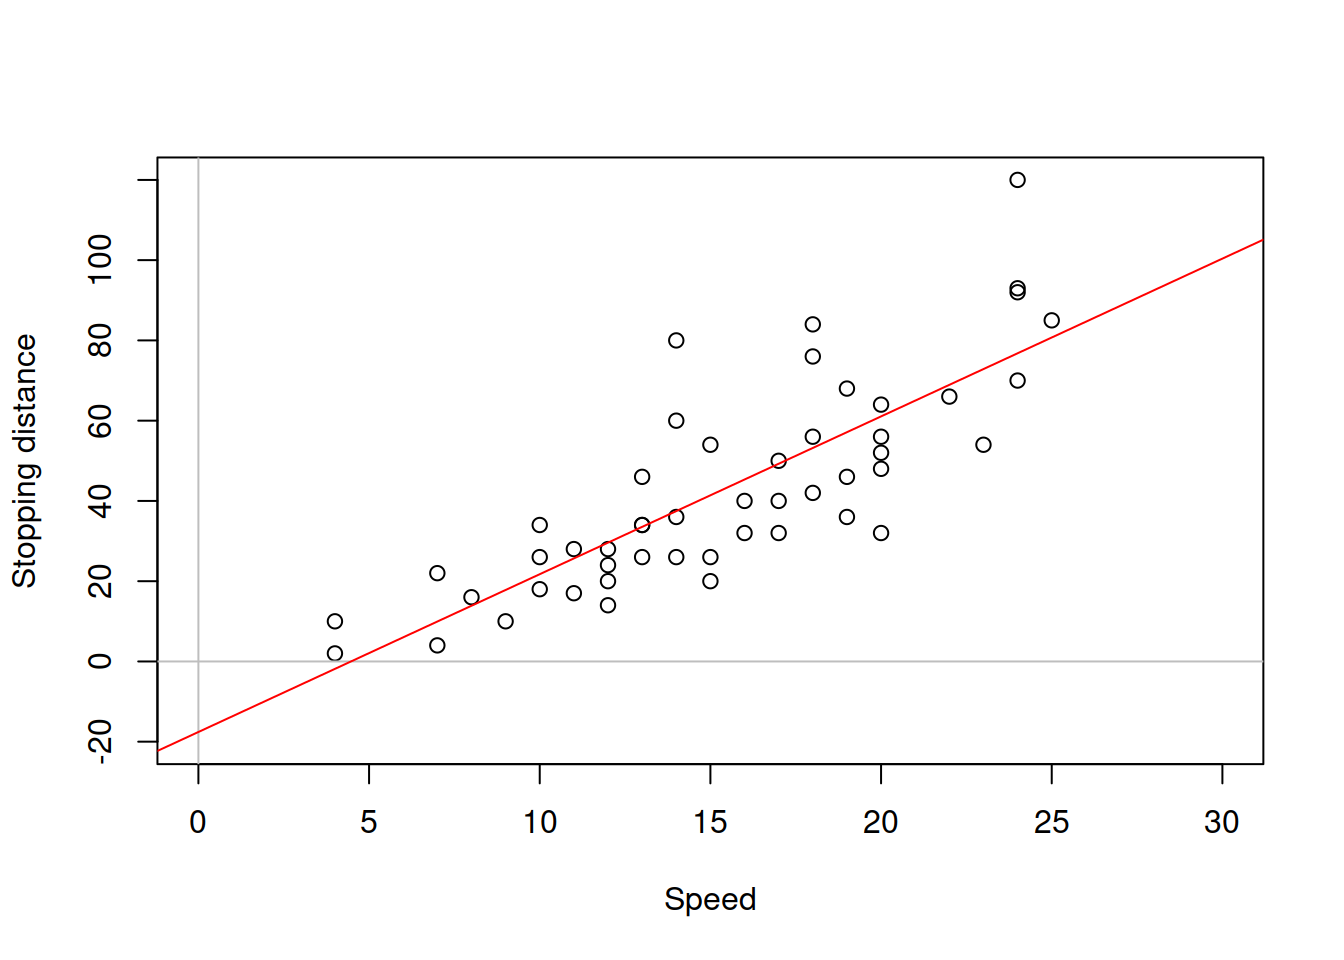 Speed vs stopping distance and a linear model